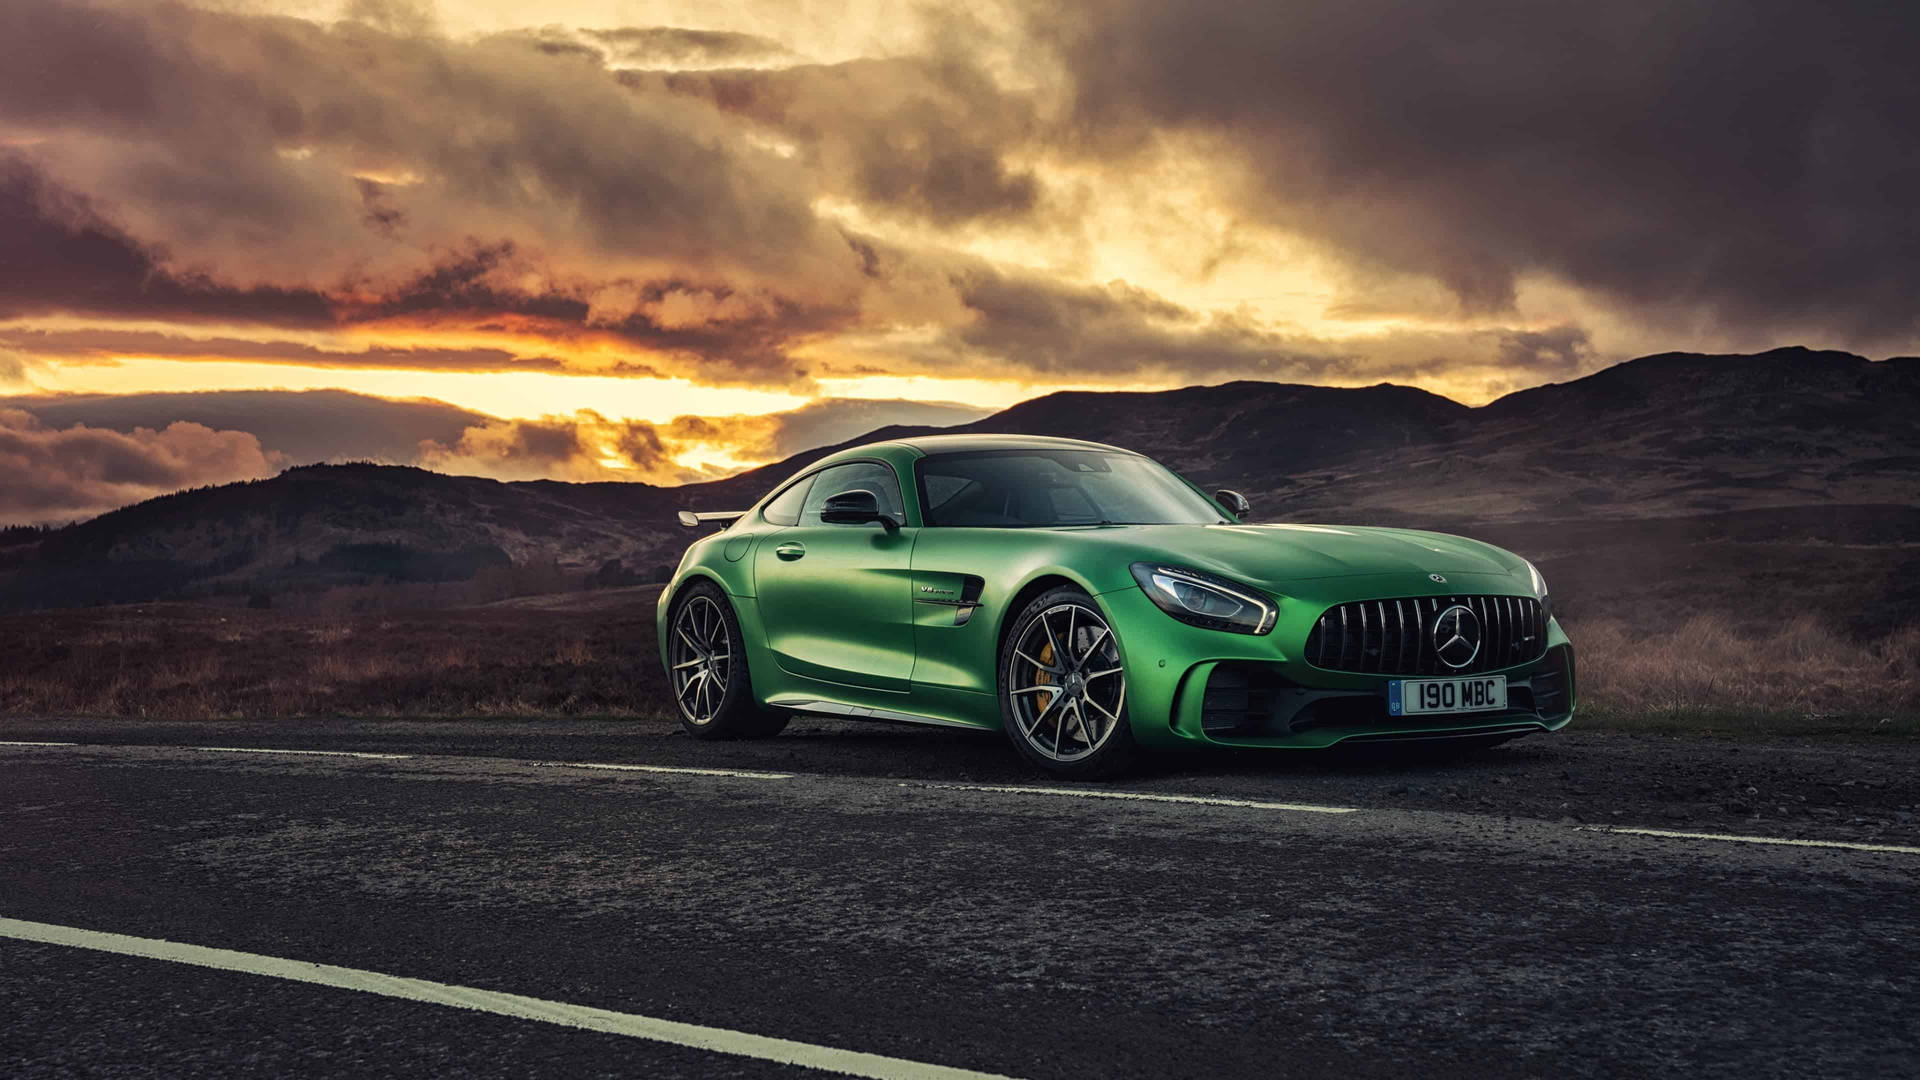 "Witness The Power of Excellence with a Mercedes Benz AMG" Wallpaper